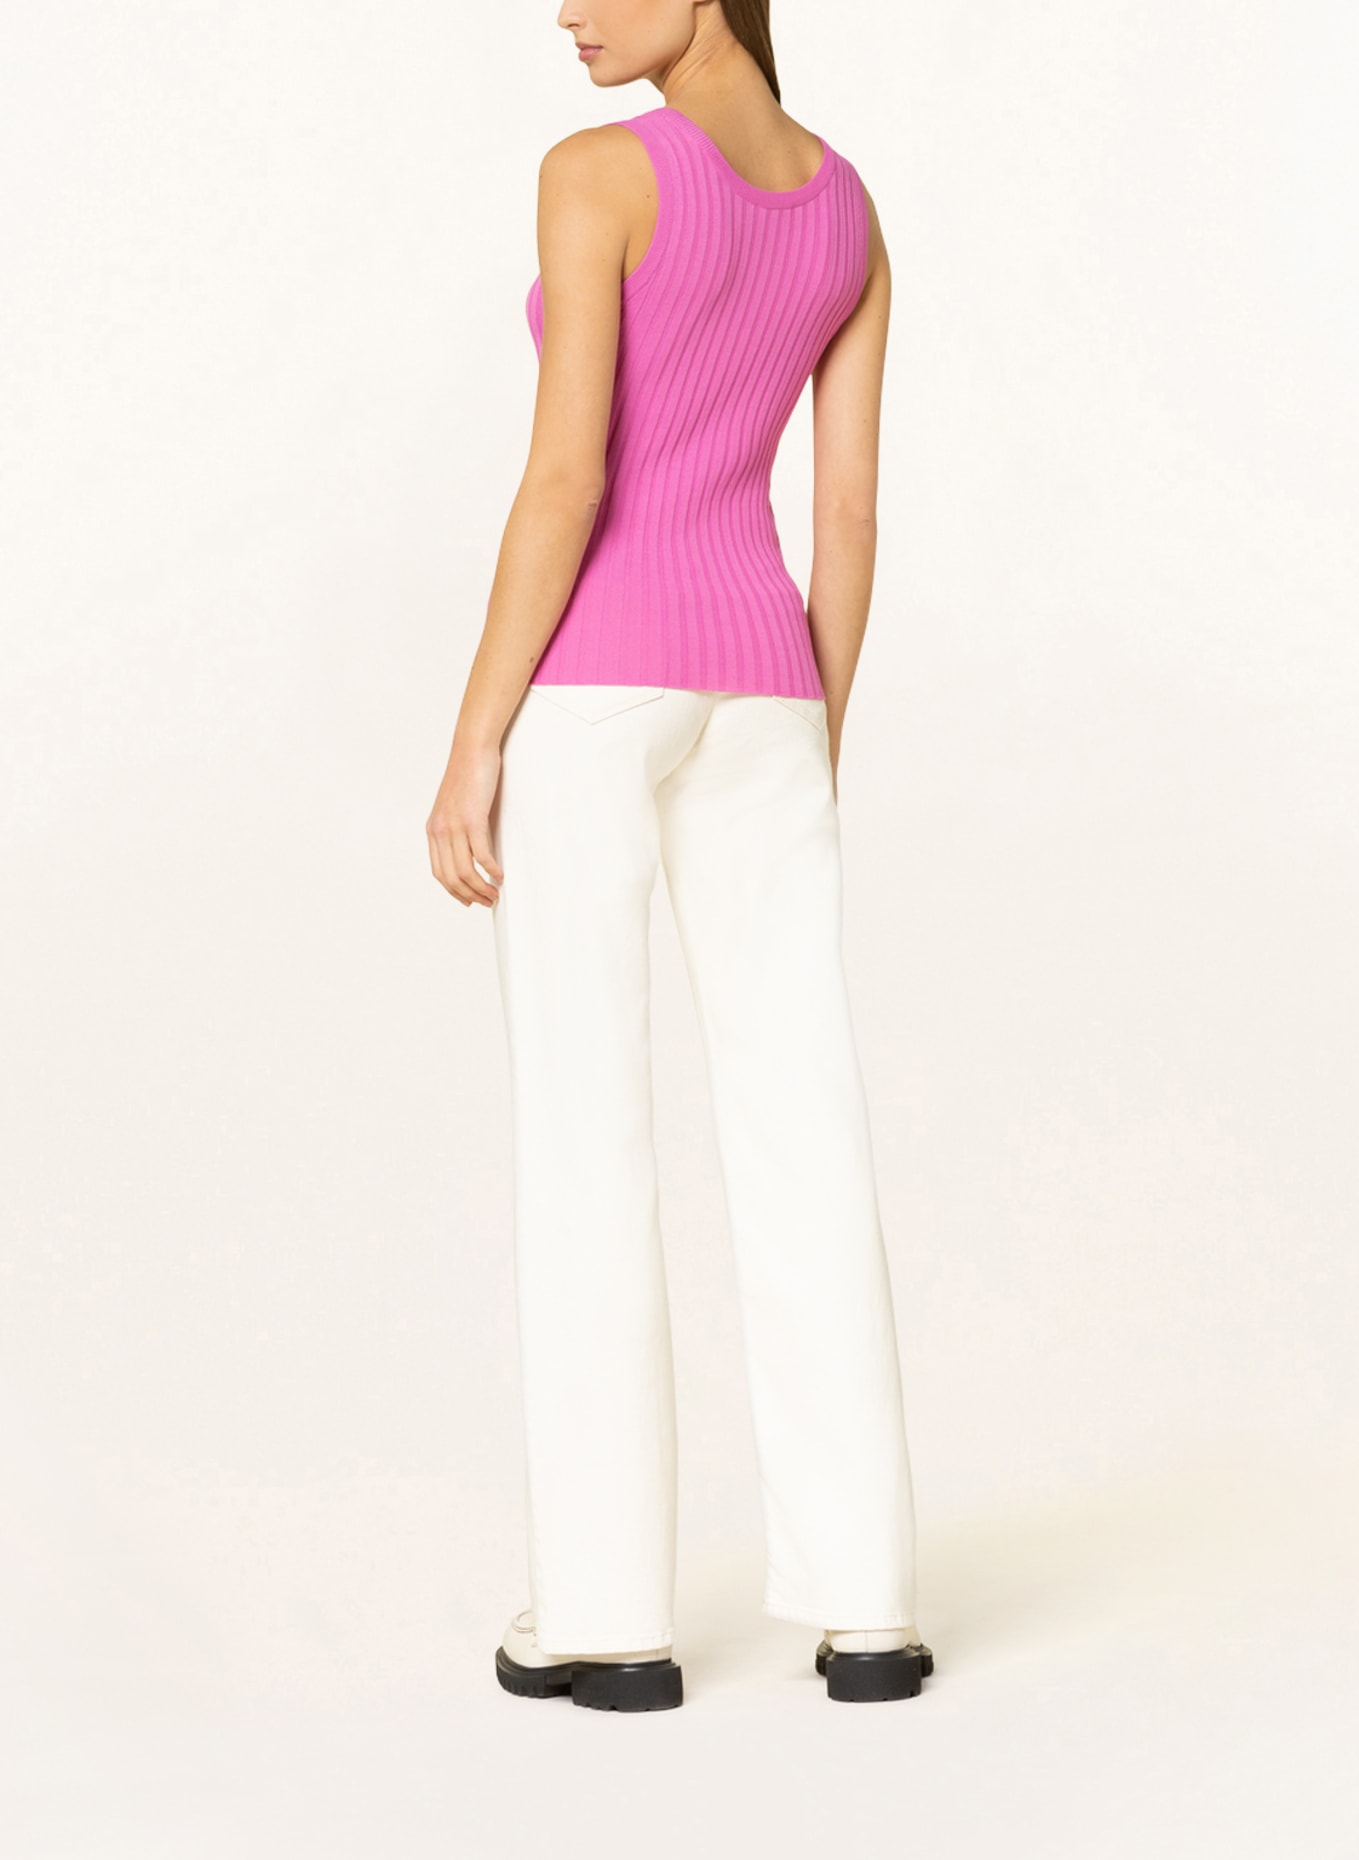 RIANI Knit top, Color: PINK (Image 3)